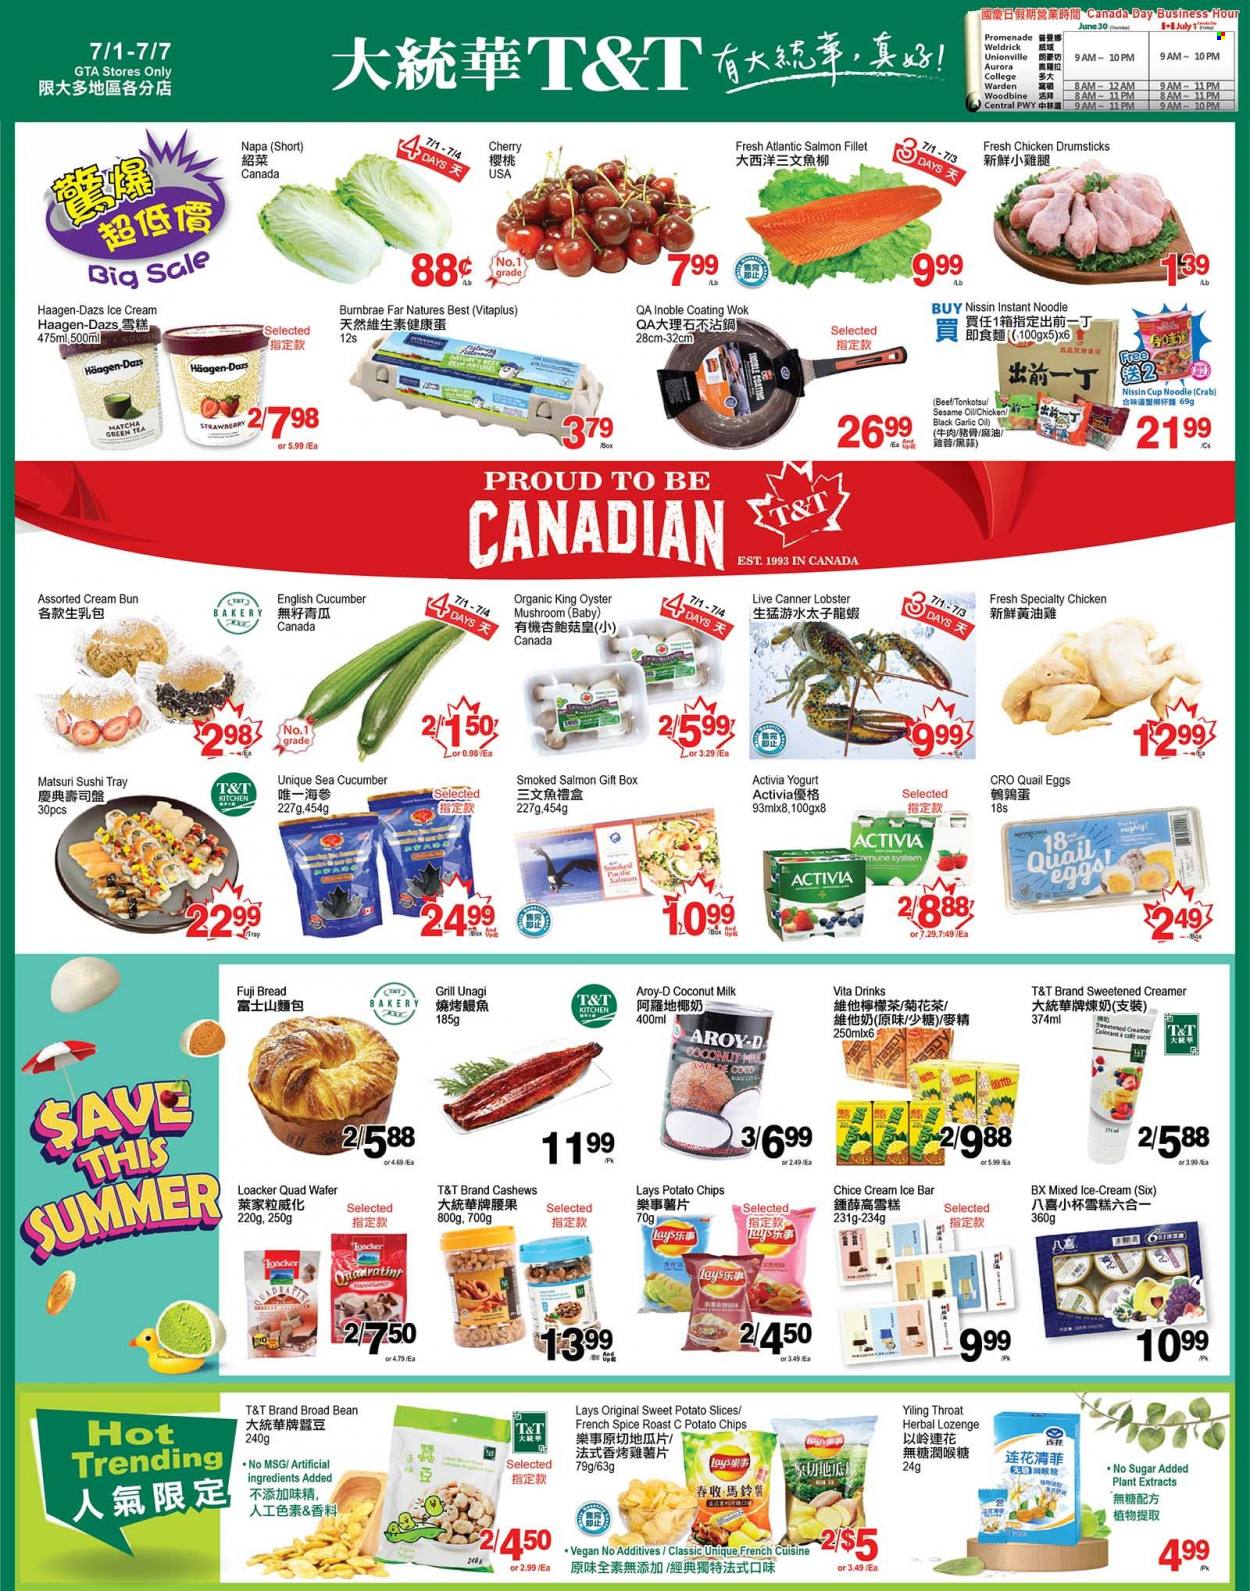 thumbnail - T&T Supermarket Flyer - July 01, 2022 - July 07, 2022 - Sales products - oyster mushrooms, corn, garlic, sweet potato, cherries, lobster, salmon, salmon fillet, smoked salmon, oysters, crab, noodles, Nissin, yoghurt, Activia, eggs, creamer, Häagen-Dazs, wafers, potato chips, chips, Lay’s, coconut milk, spice, sesame oil, oil, cashews, green tea, matcha, tea, L'Or, quail, chicken drumsticks, chicken, gift box, pan, wok, cup. Page 1.